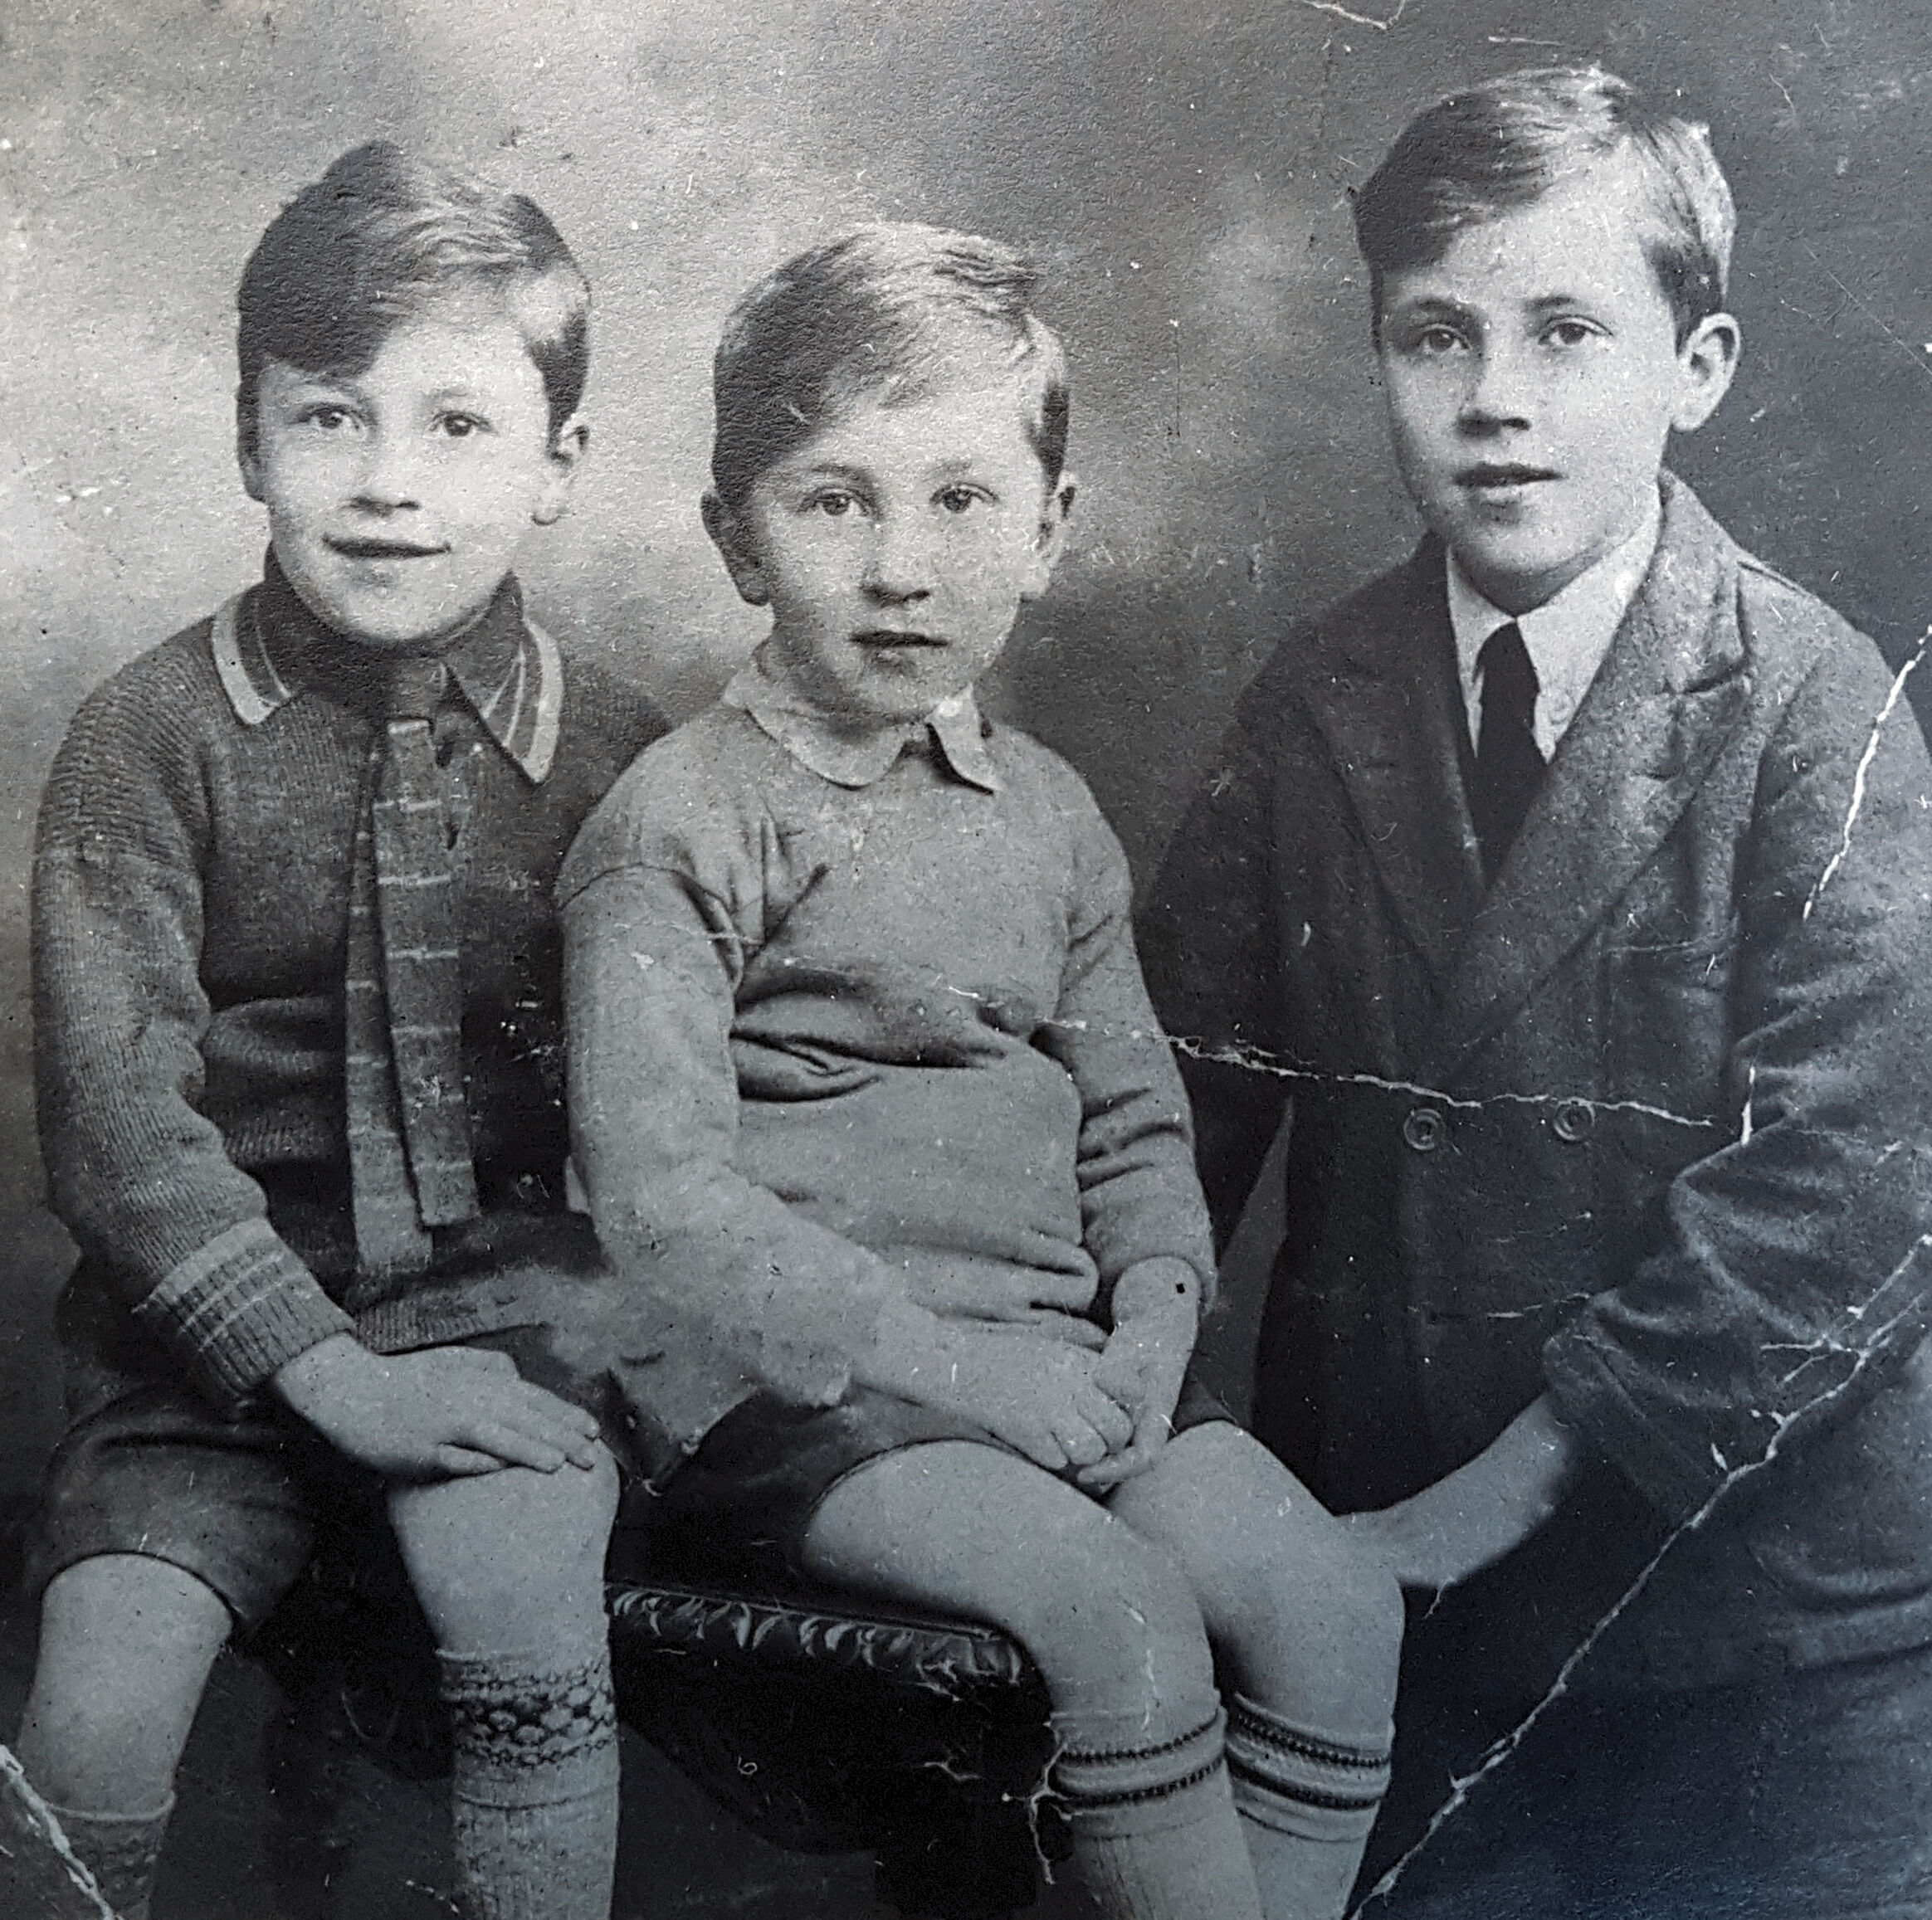 Three Adolph brothers. Ronnie 19 and Alan 17 were both killed on the 7th May 1941  the last day of the Liverpool blitz along with their father Charles Earnst Fredrick Adolph who was just 49. John was in North Africa at the time with the british tank corps at El Alamain